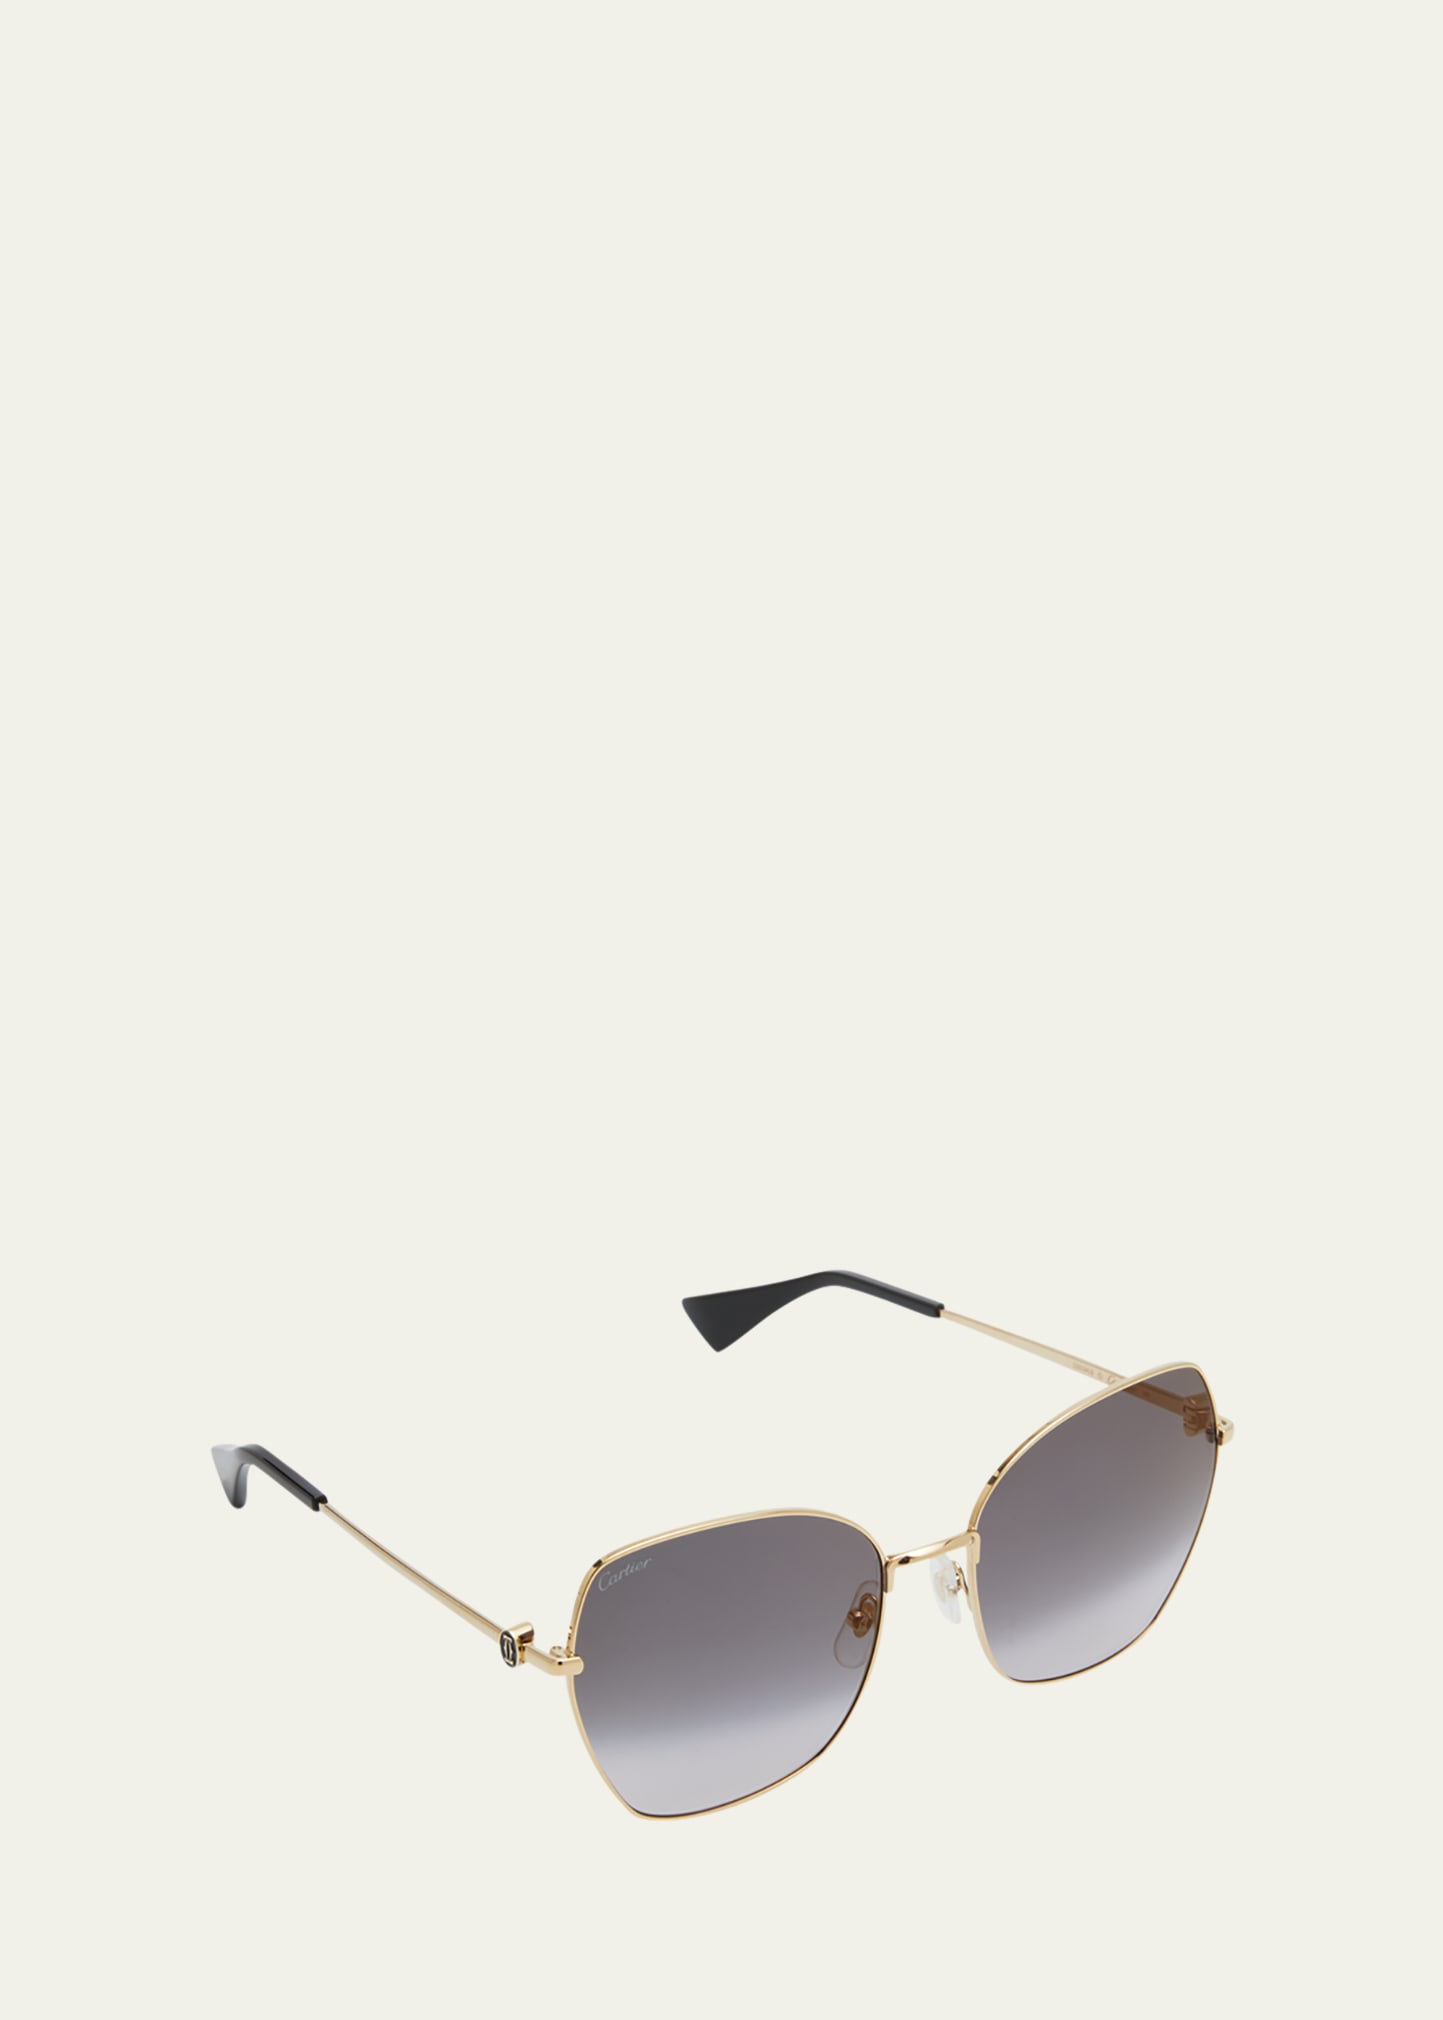 Cartier Logo Metal Butterfly Sunglasses In 001 Smooth Golden